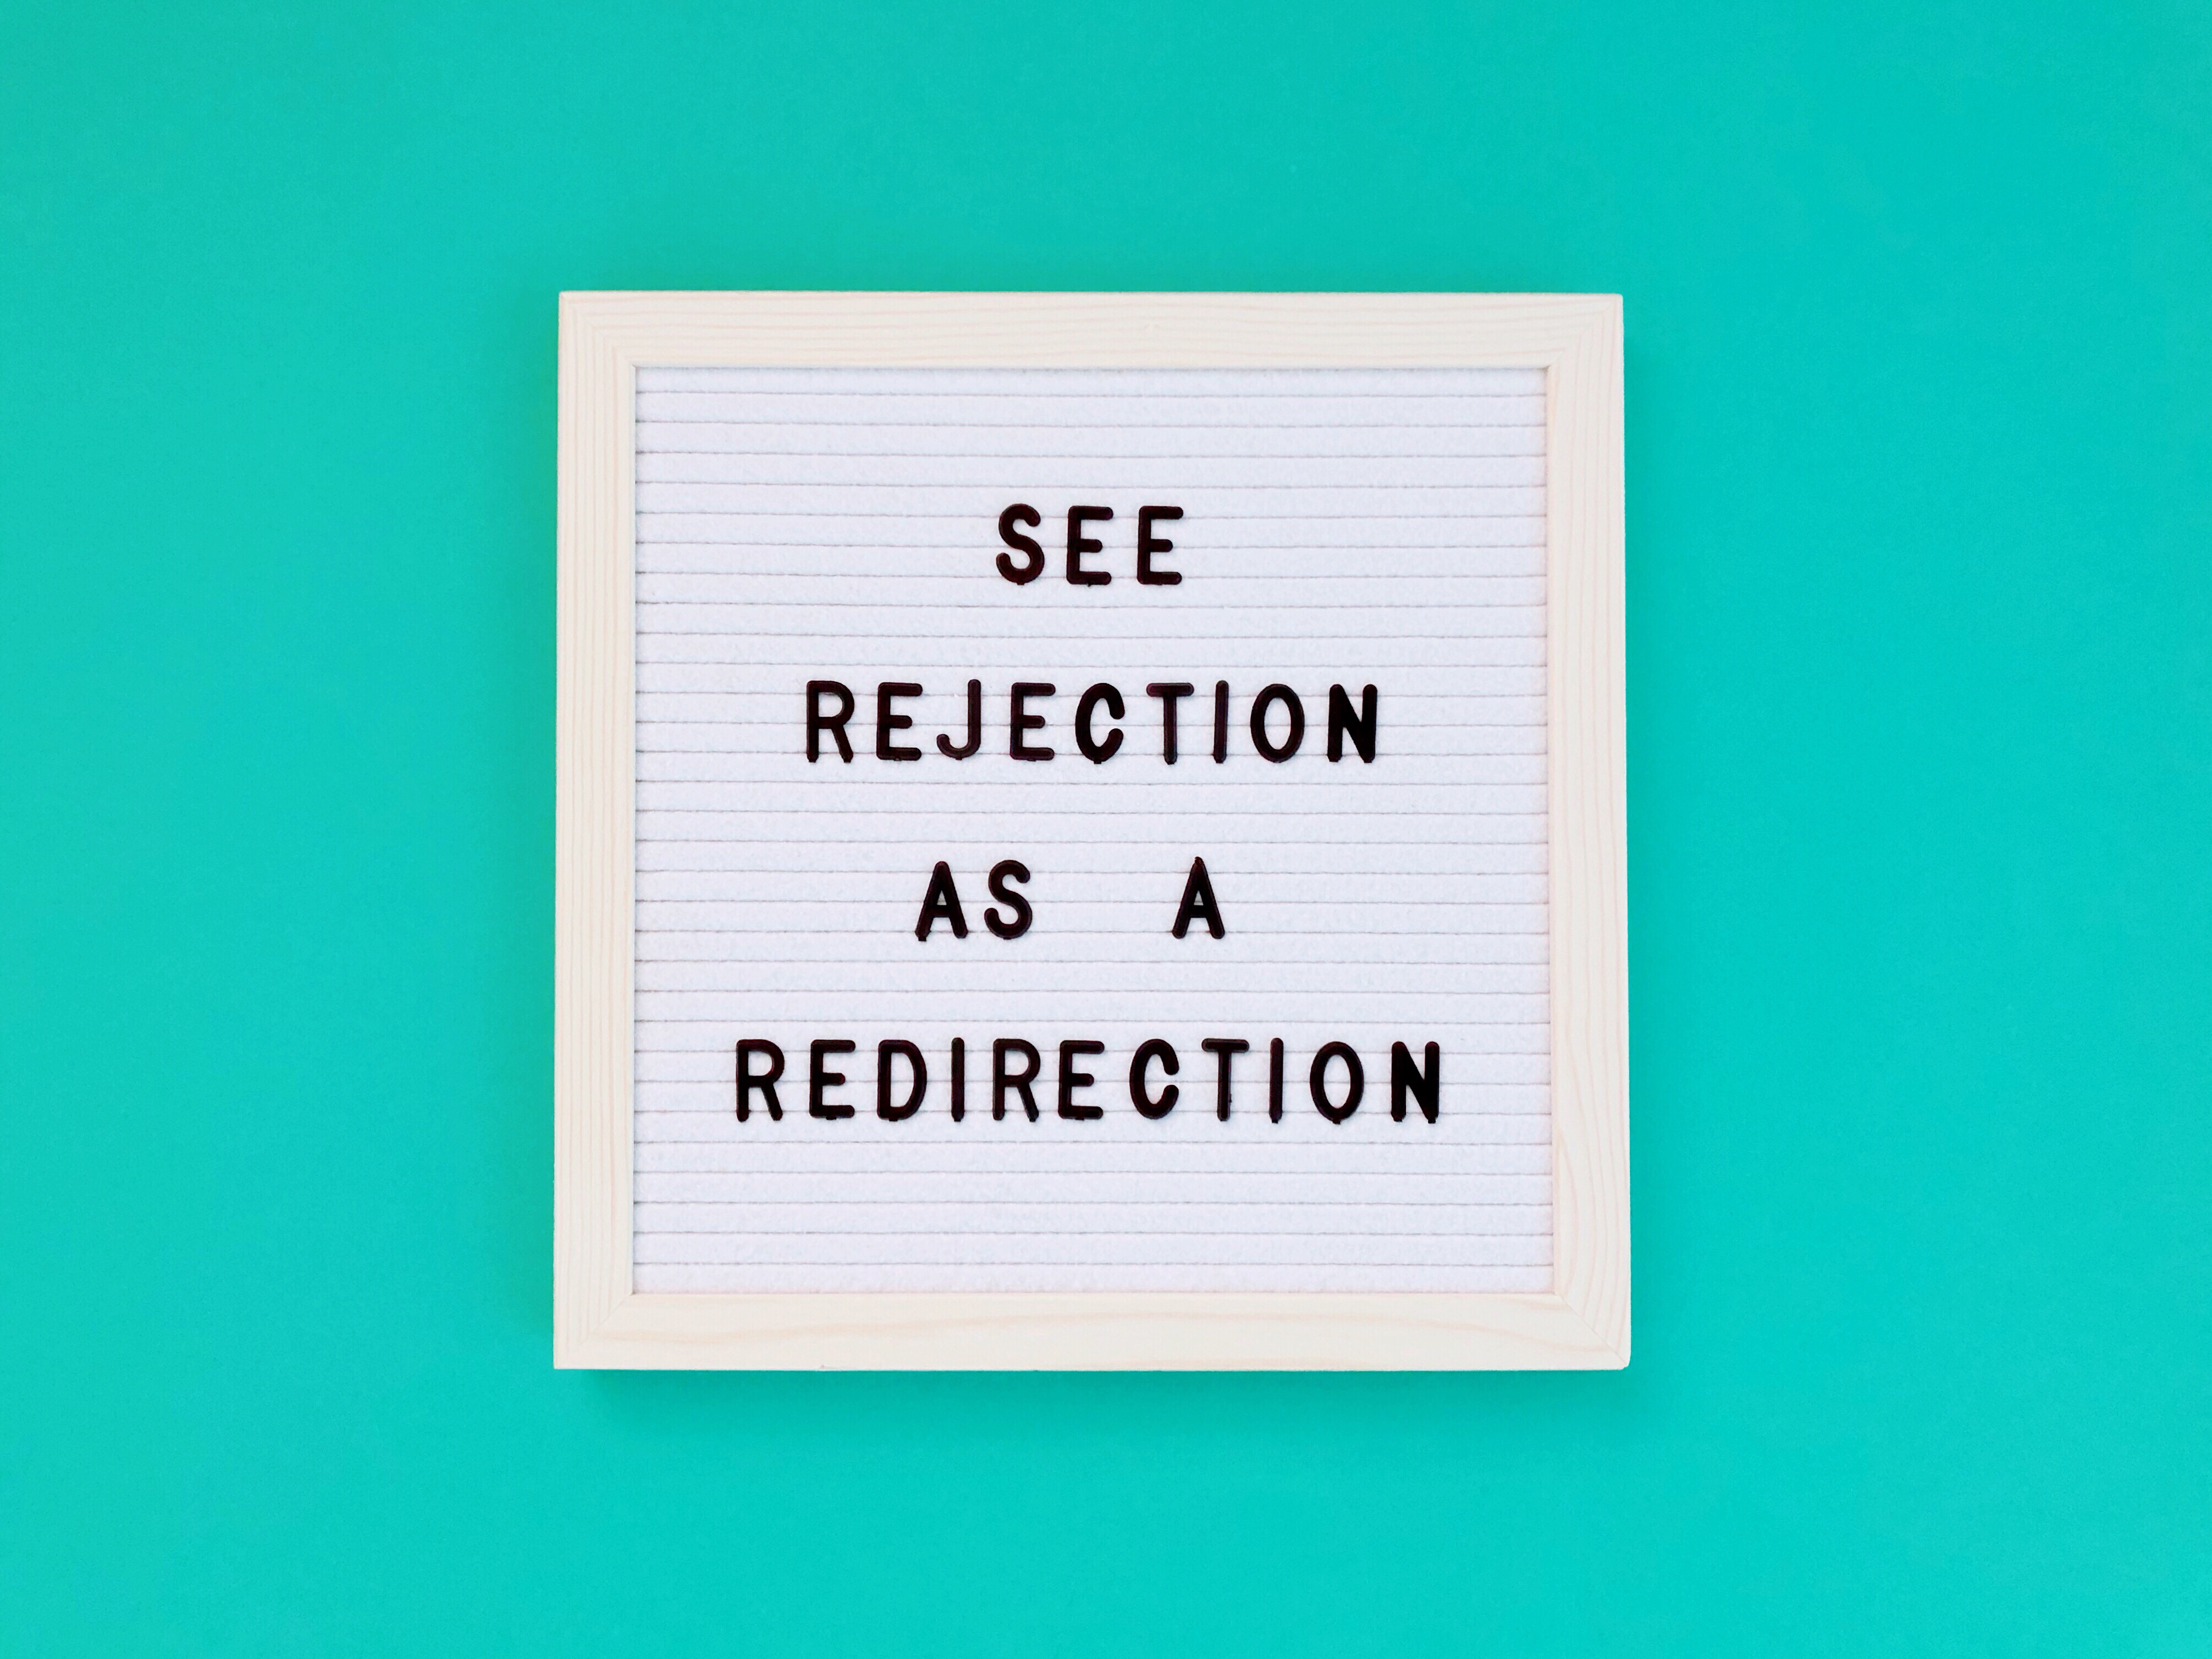 handle rejection, rejection, rejection at work, how to handle rejection, how to handle rejection at work, deal with rejection, work rejection, dealing with rejection at work, coping with rejection, how to cope with rejection at work